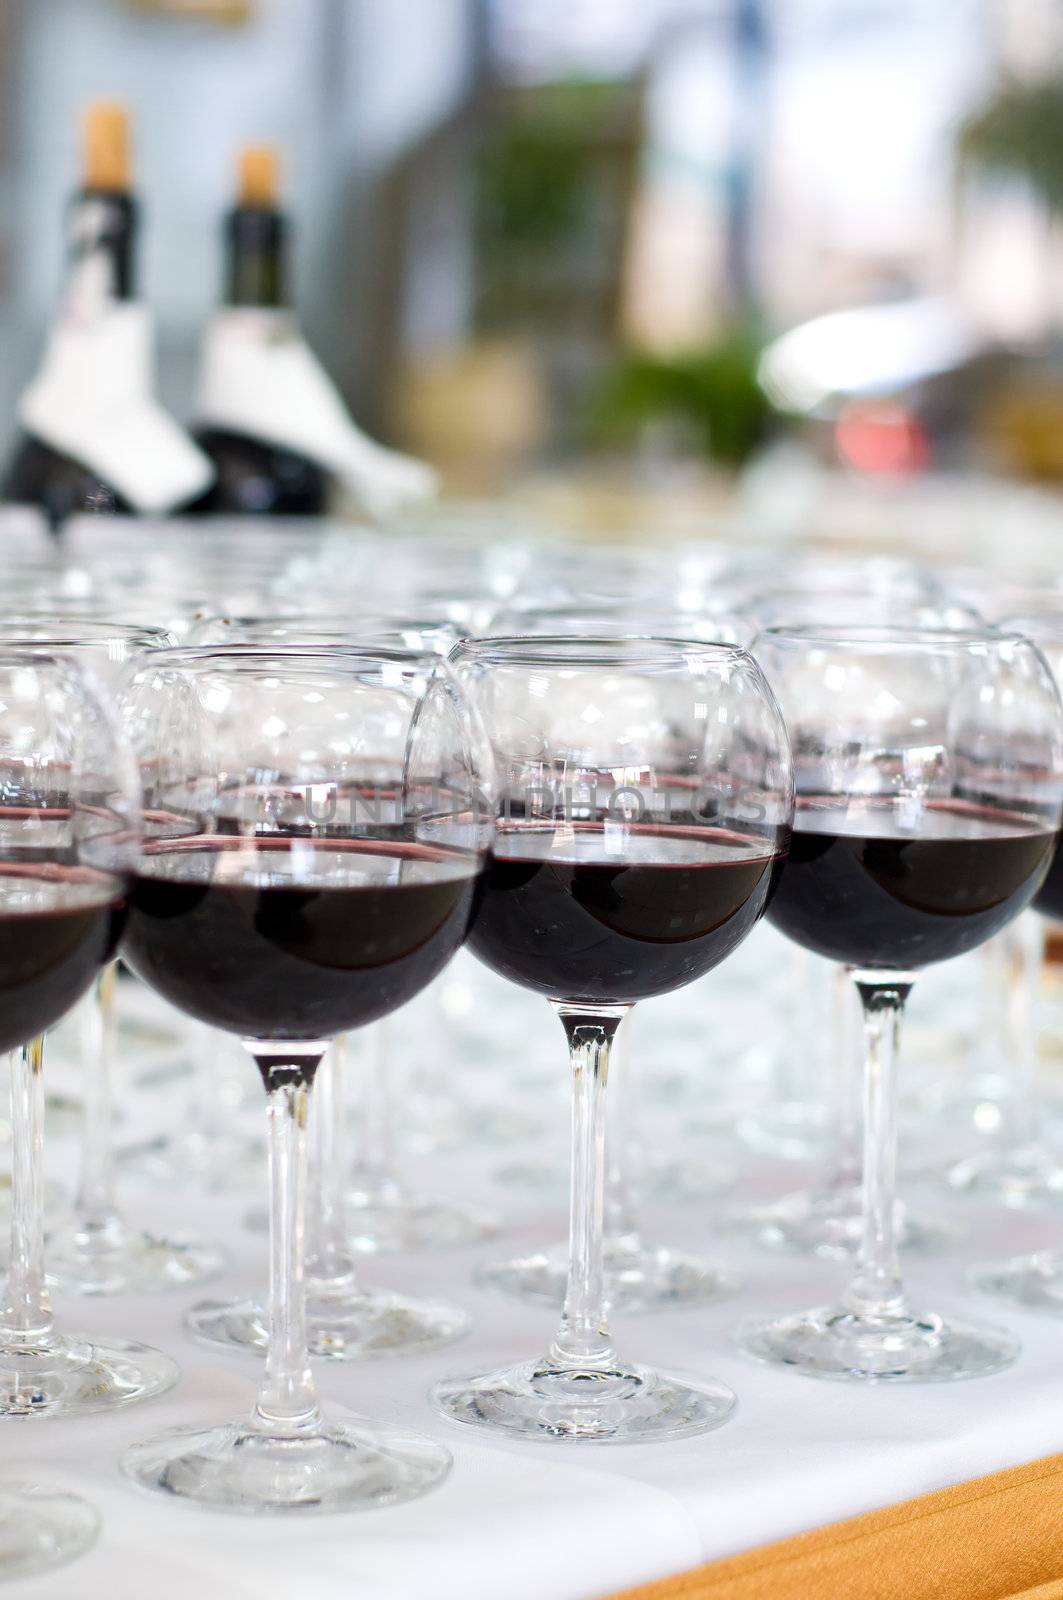 group arrangement of glasses with red wine, selective focus